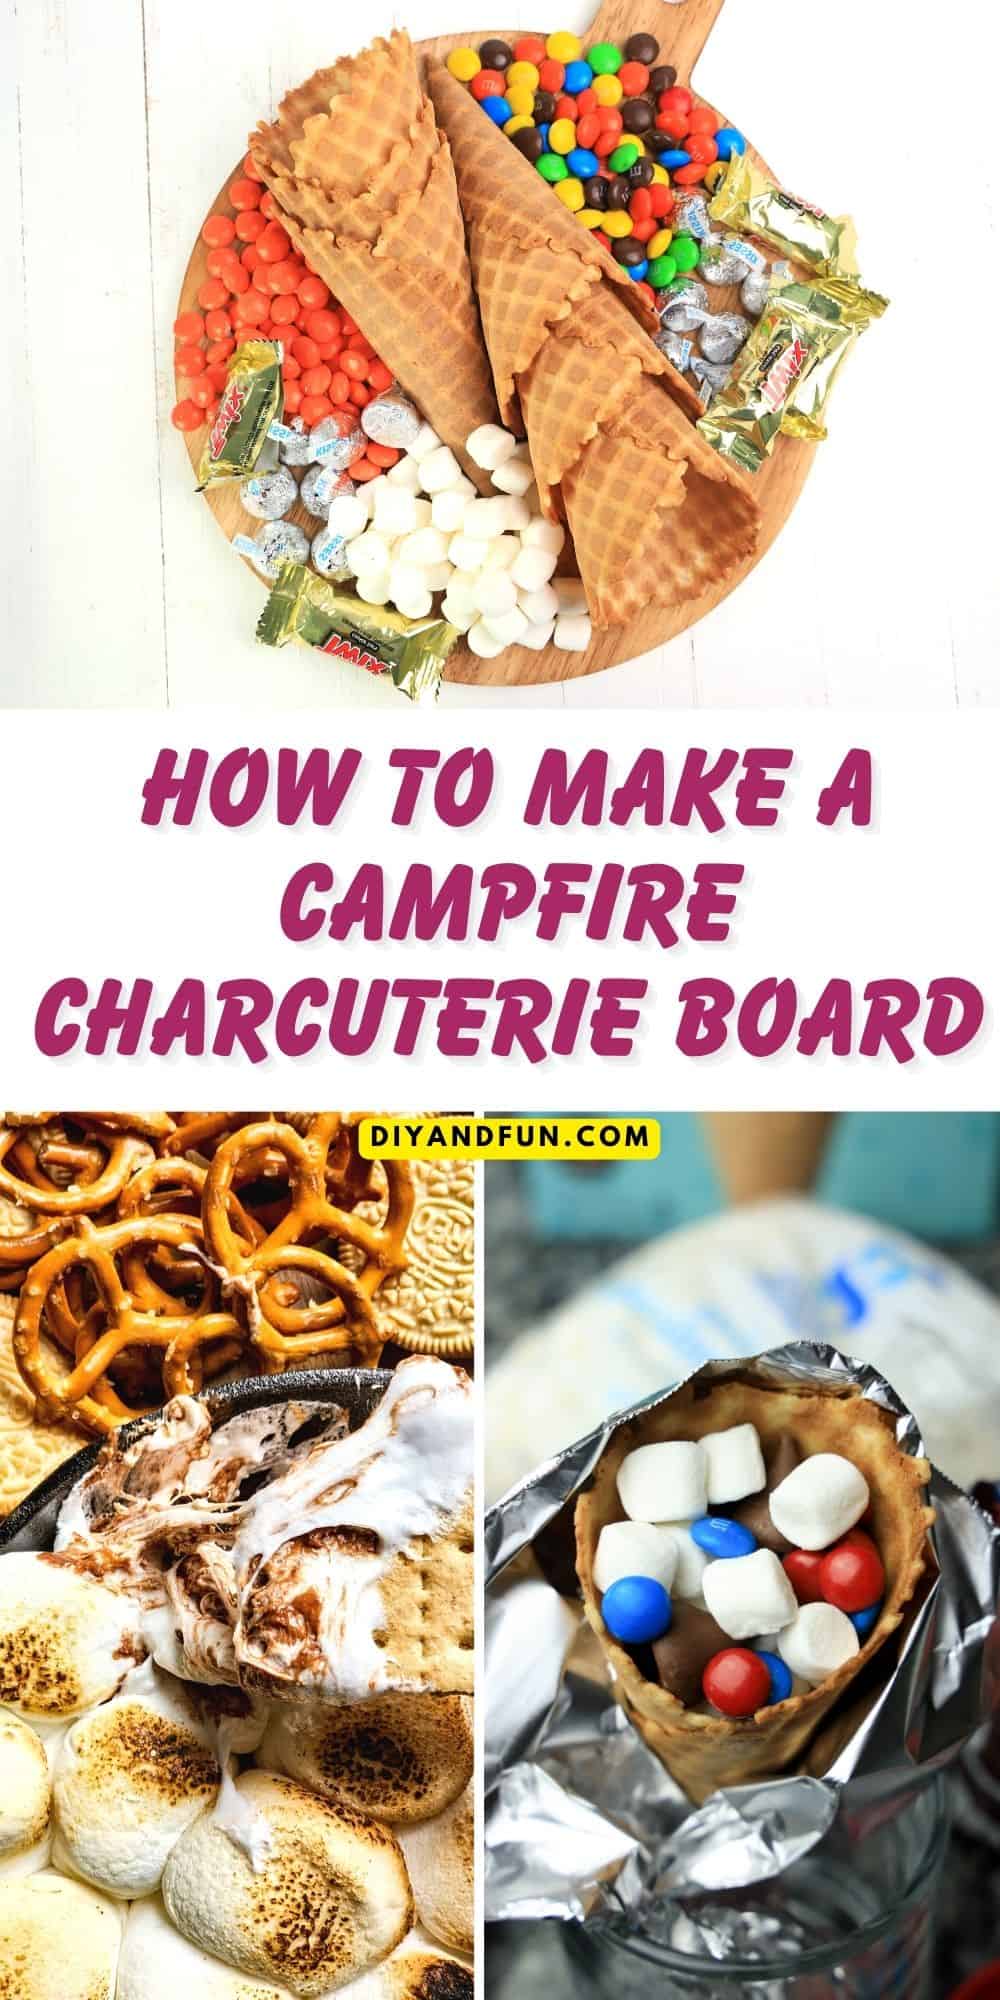 How to make a Campfire Charcuterie Board, Includes recipes for S'mores board,  S'mores stuffed campfire cones, and patriotic cones.